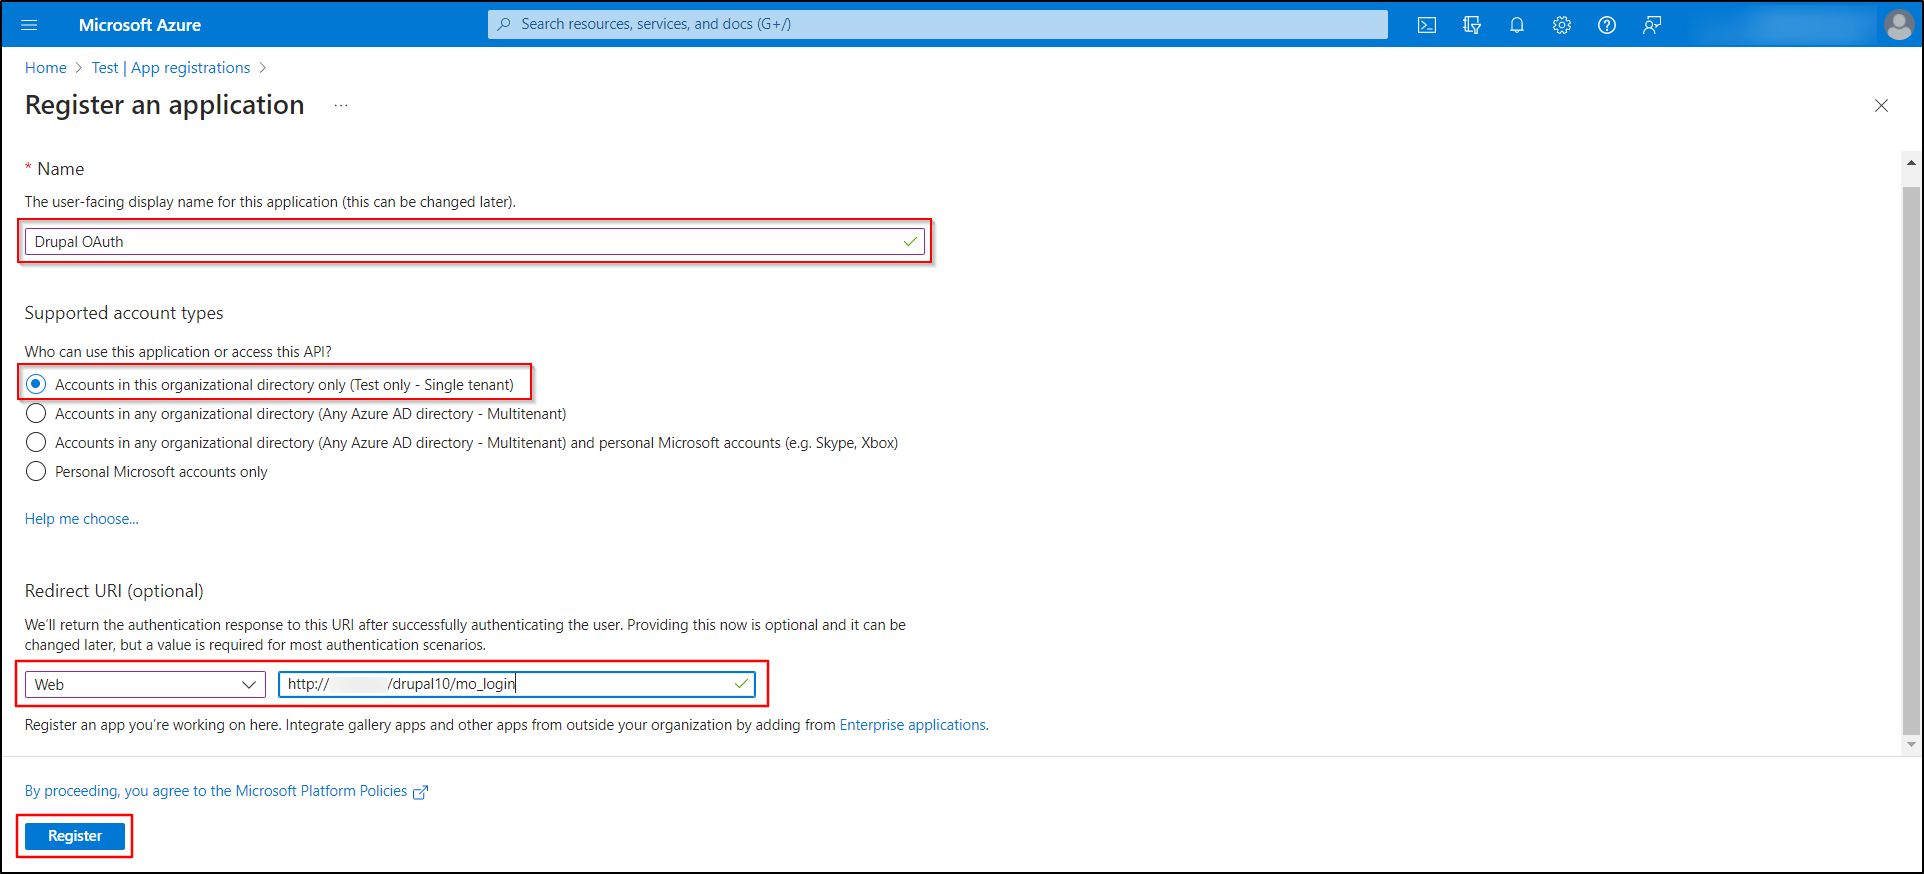 Microsoft Azure O365 - Register an application, provide the required details